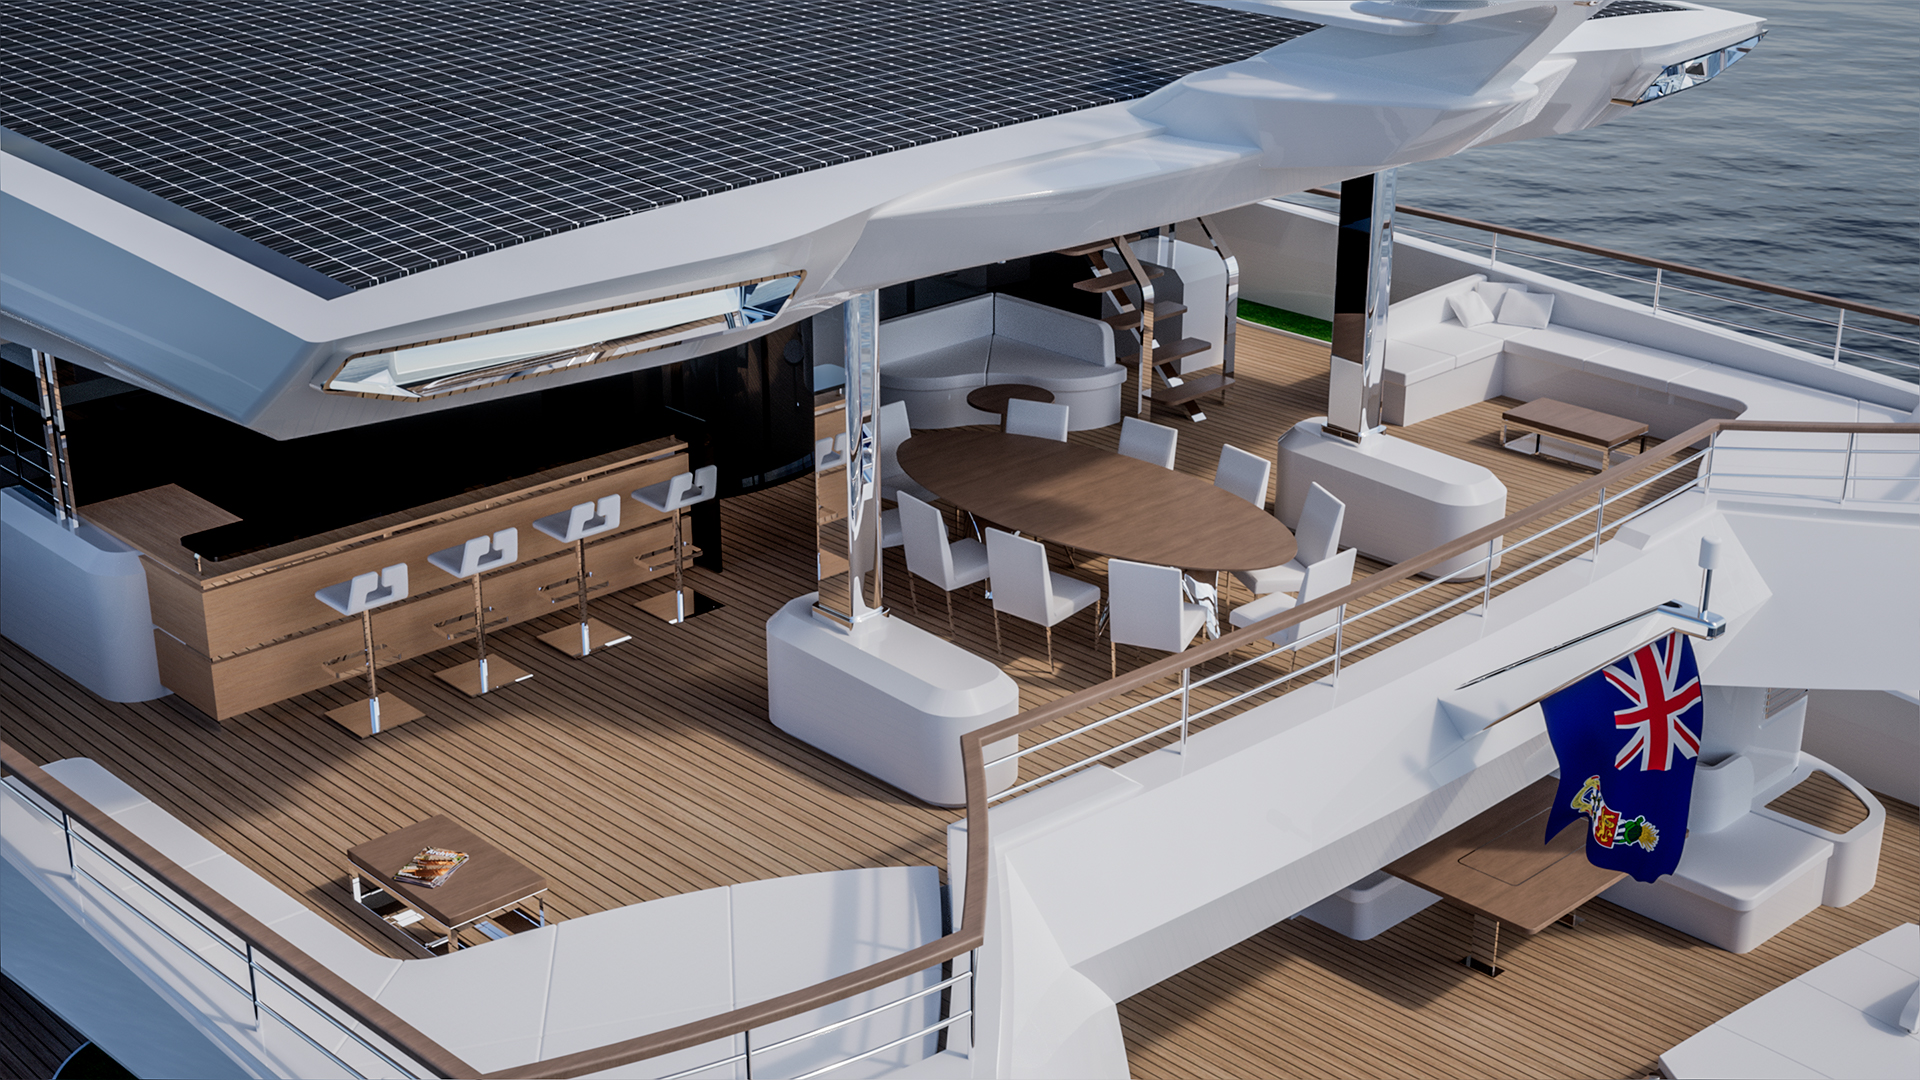 Exterior terrace on the second deck of a yacht